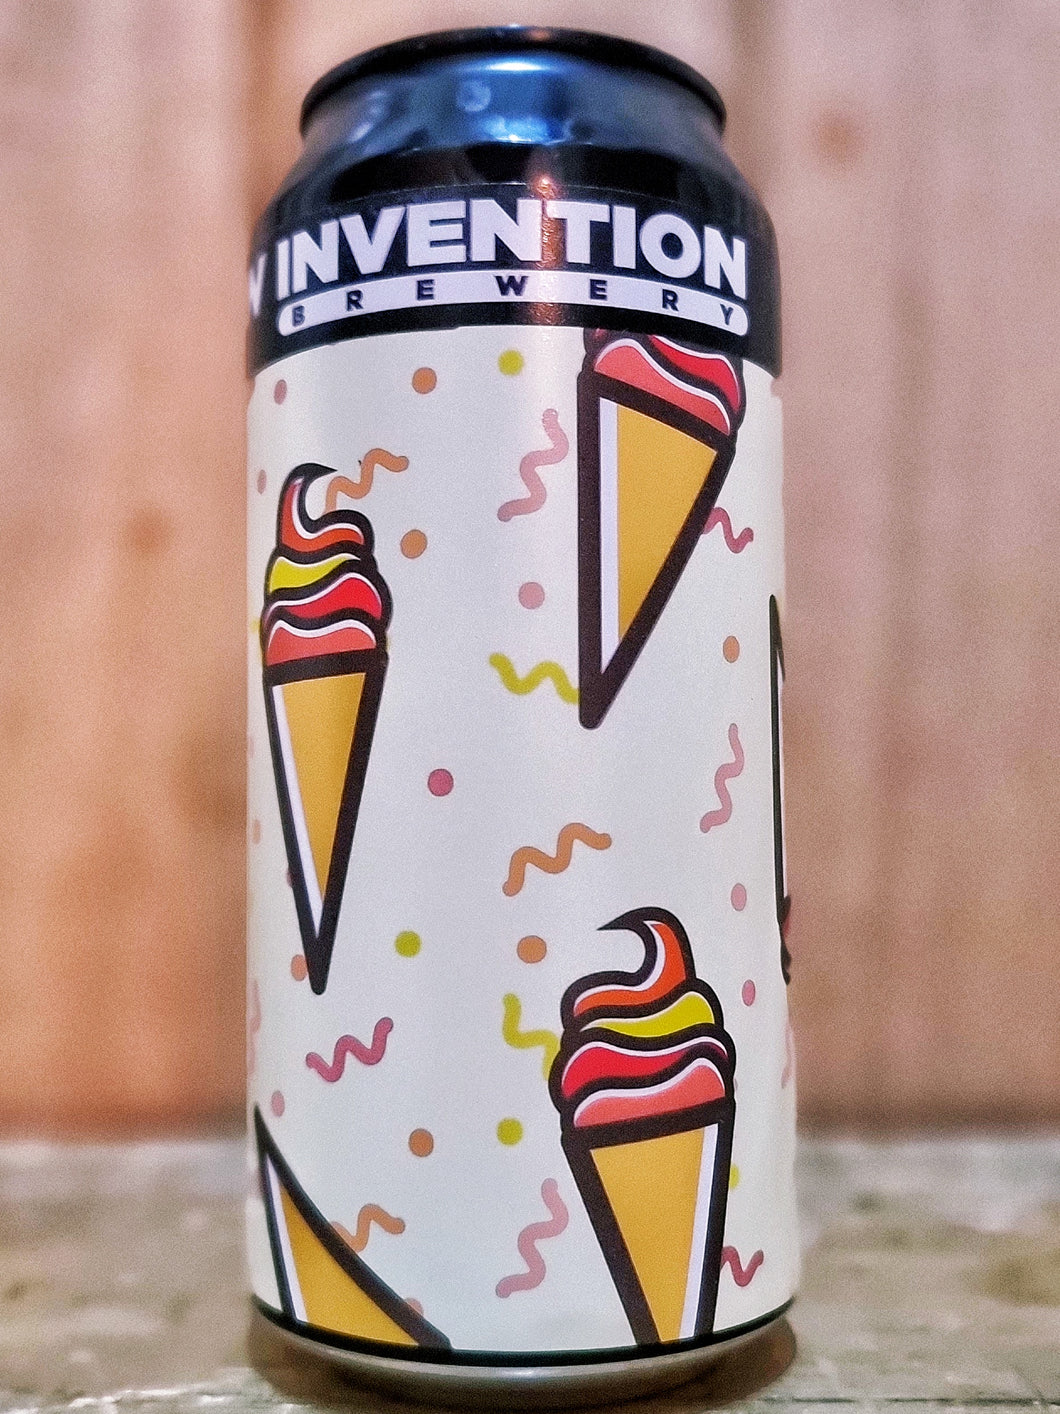 New Invention Brewery -Ice Cream Sour